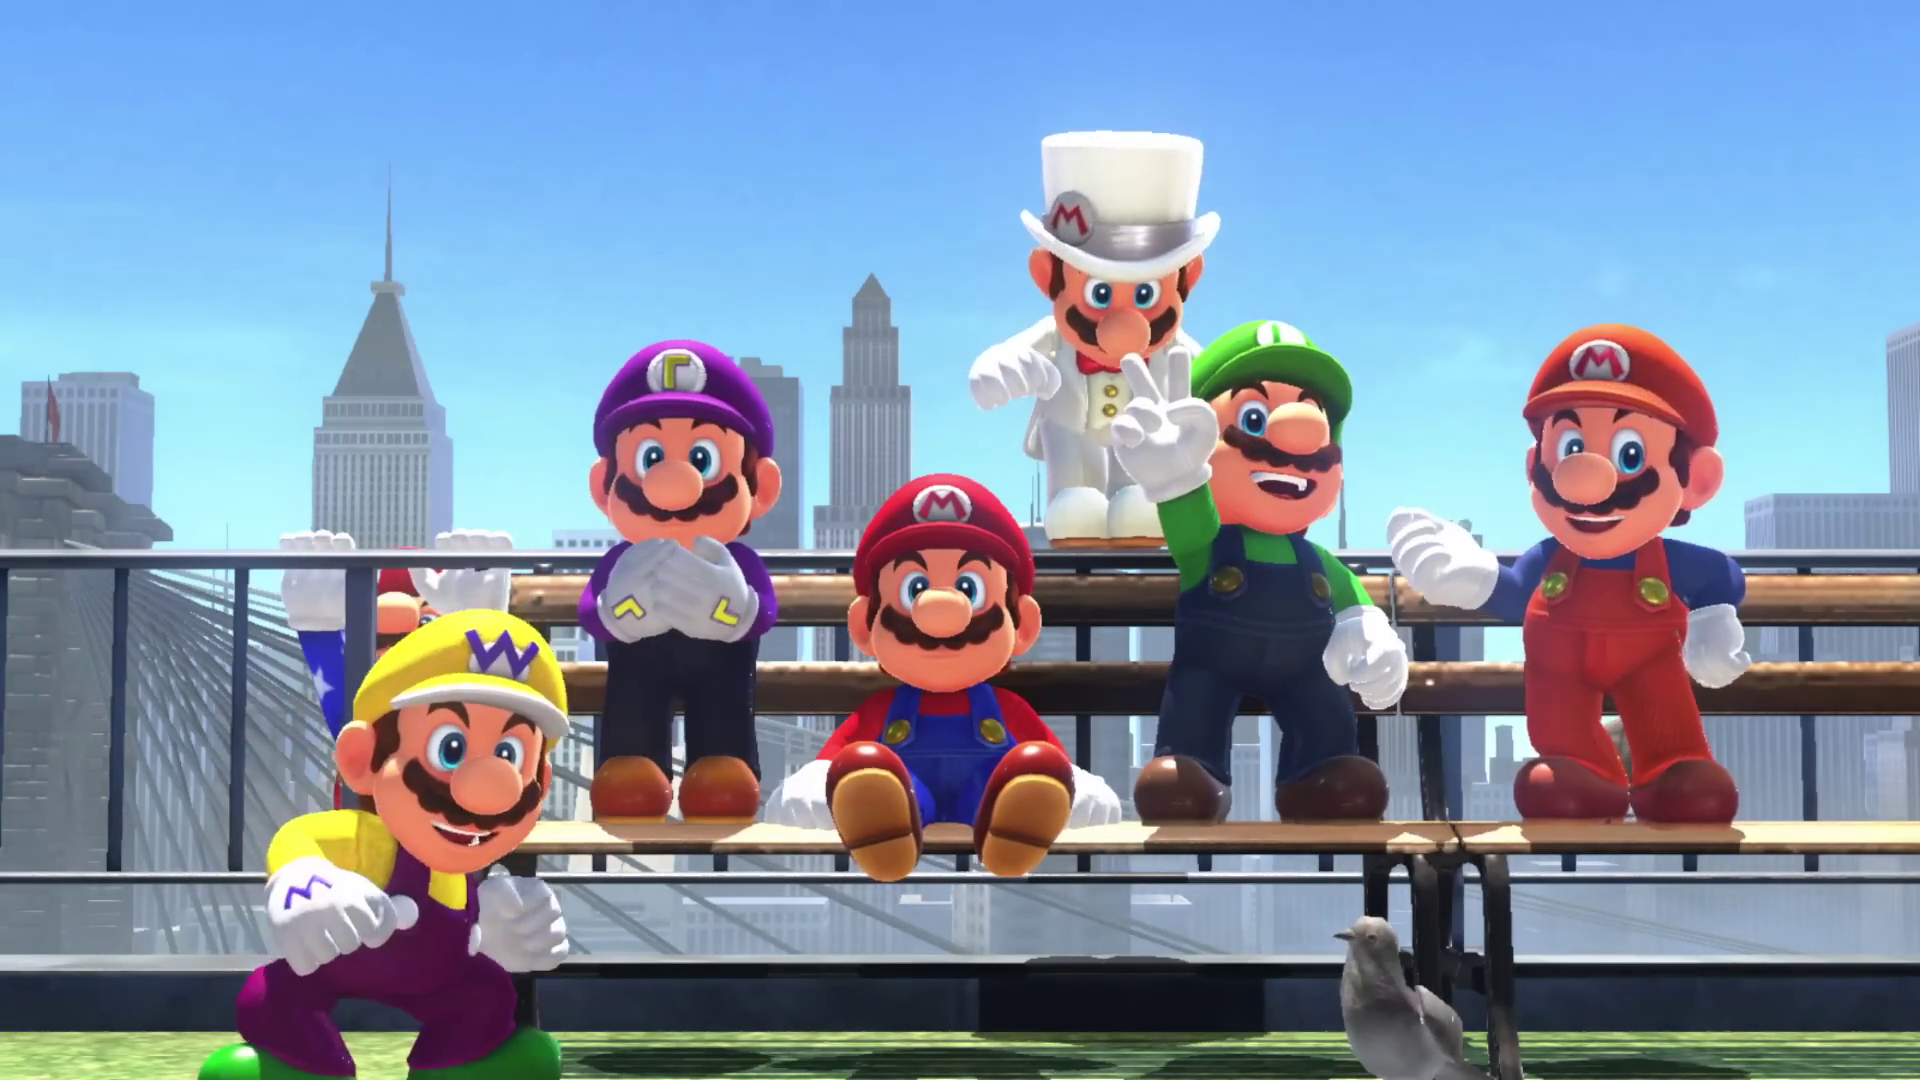 An image of a bunch of Mario in Super Mario Odyssey sitting and standing on a bench. They each have a different outfit. 